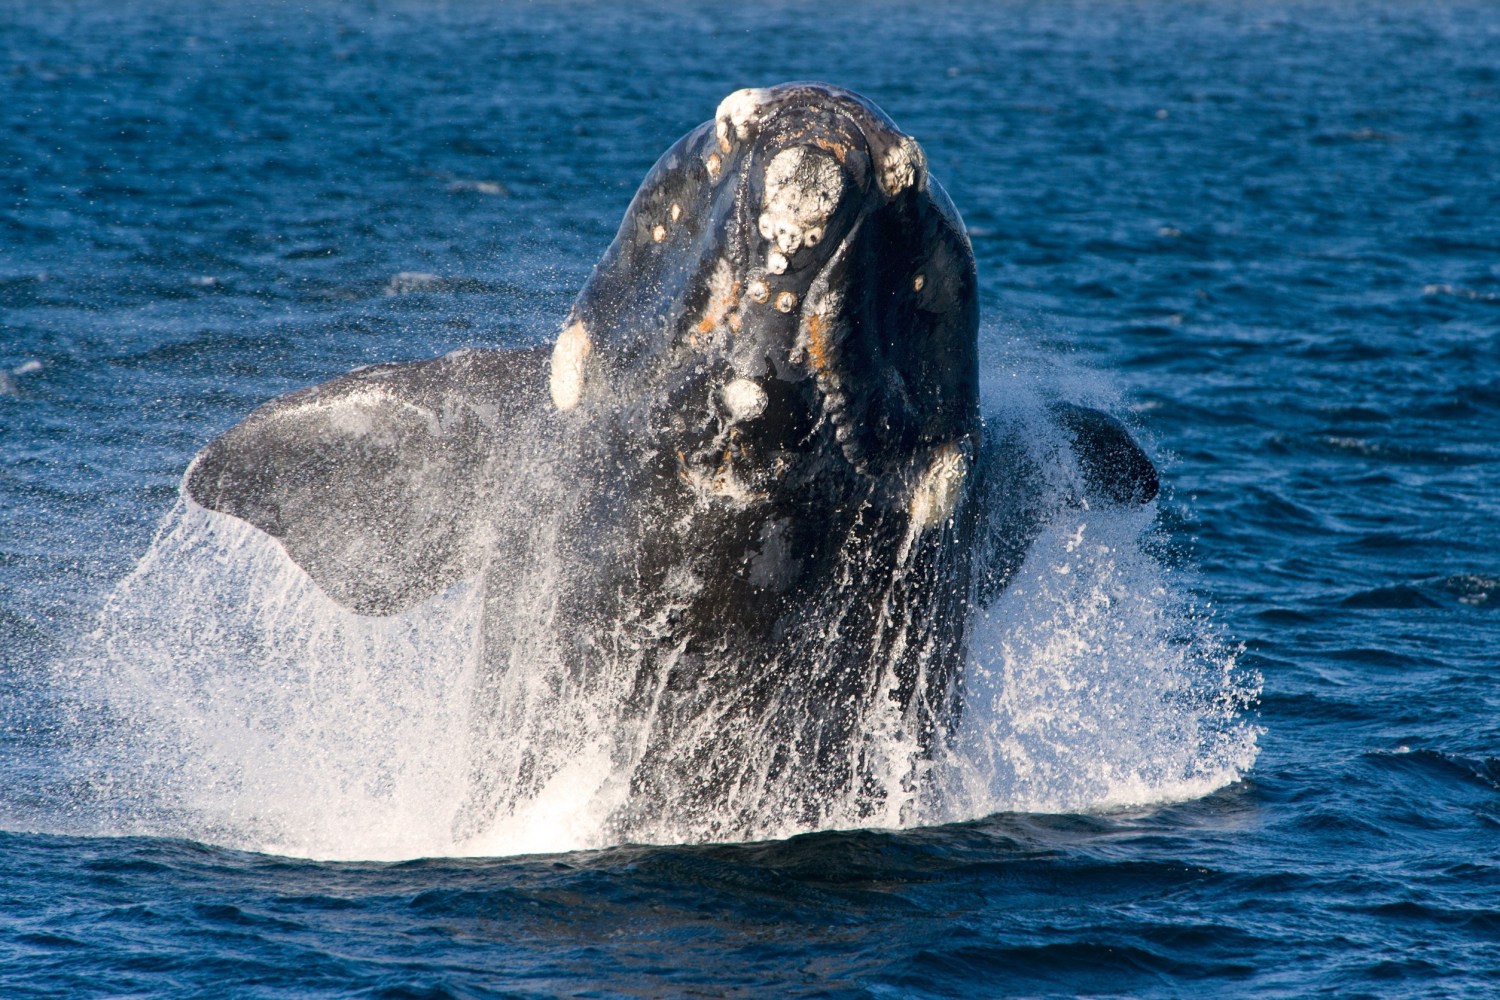 Right whale jumping out of the water